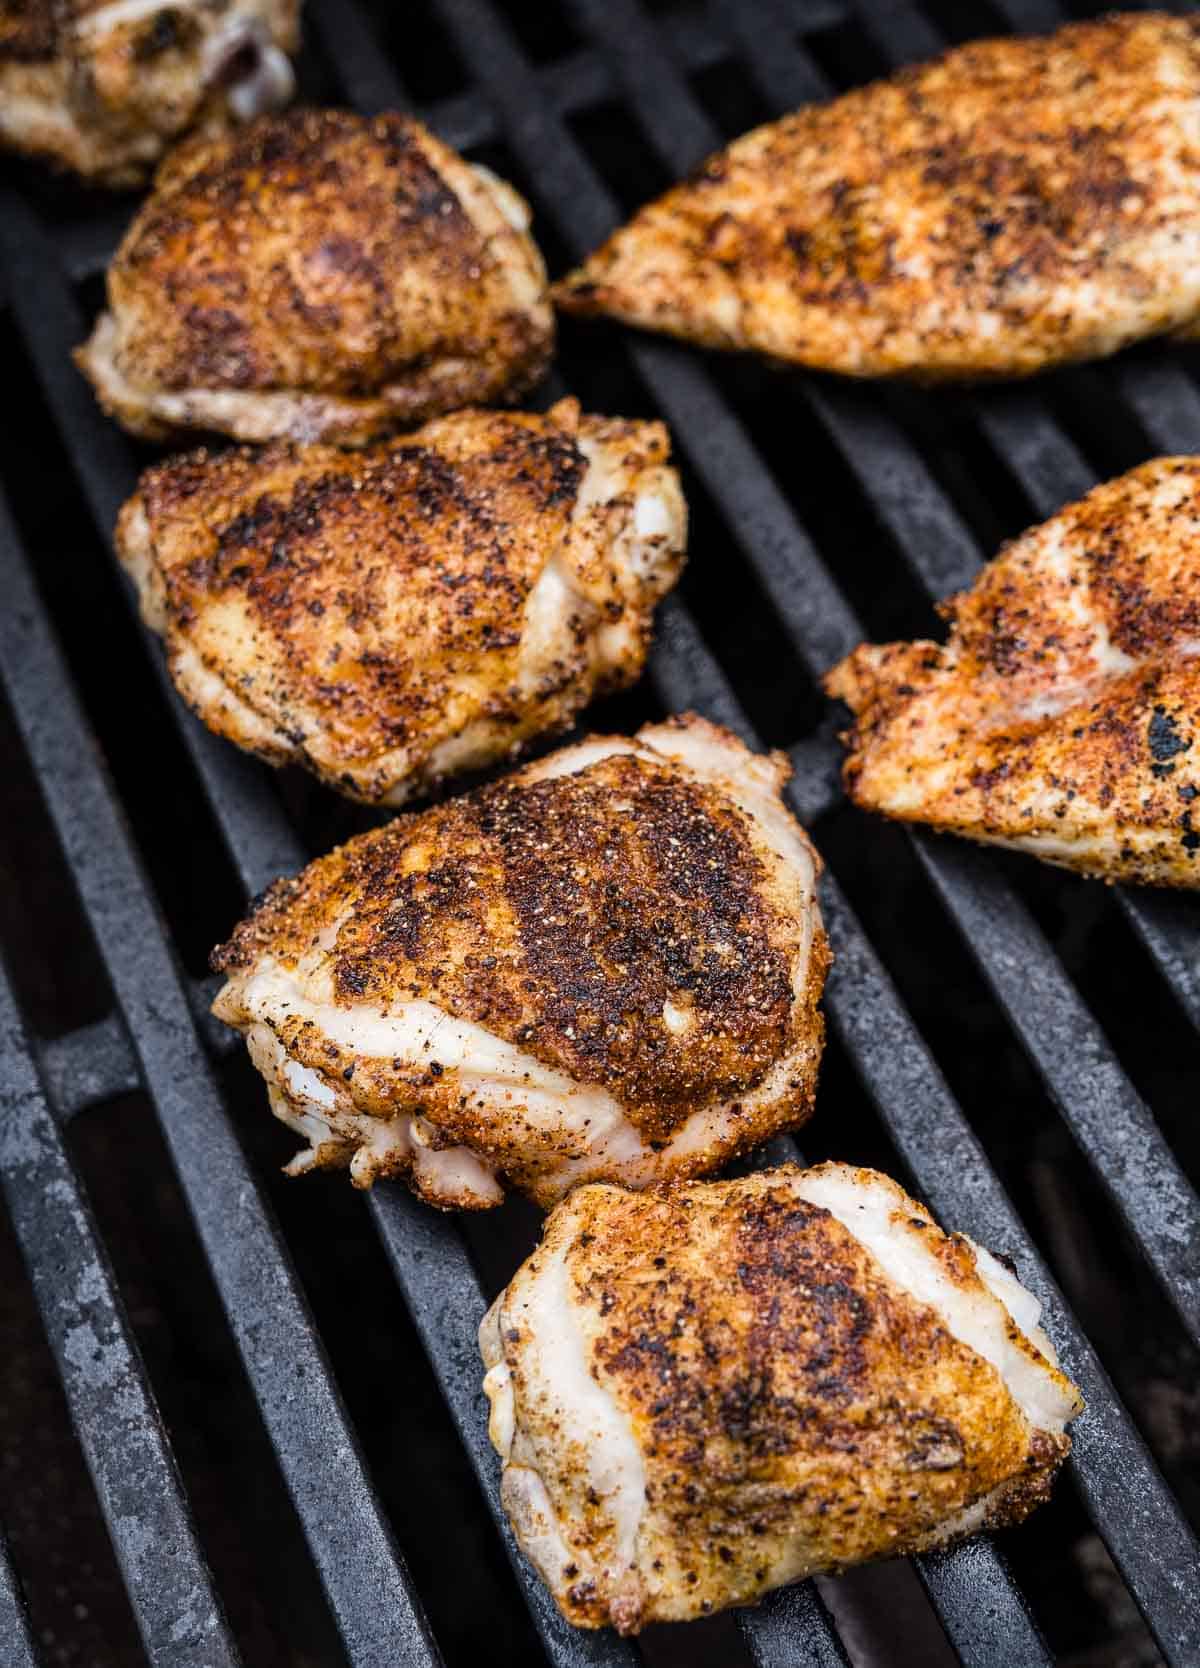 Grilled chicken cooking on a gas grill